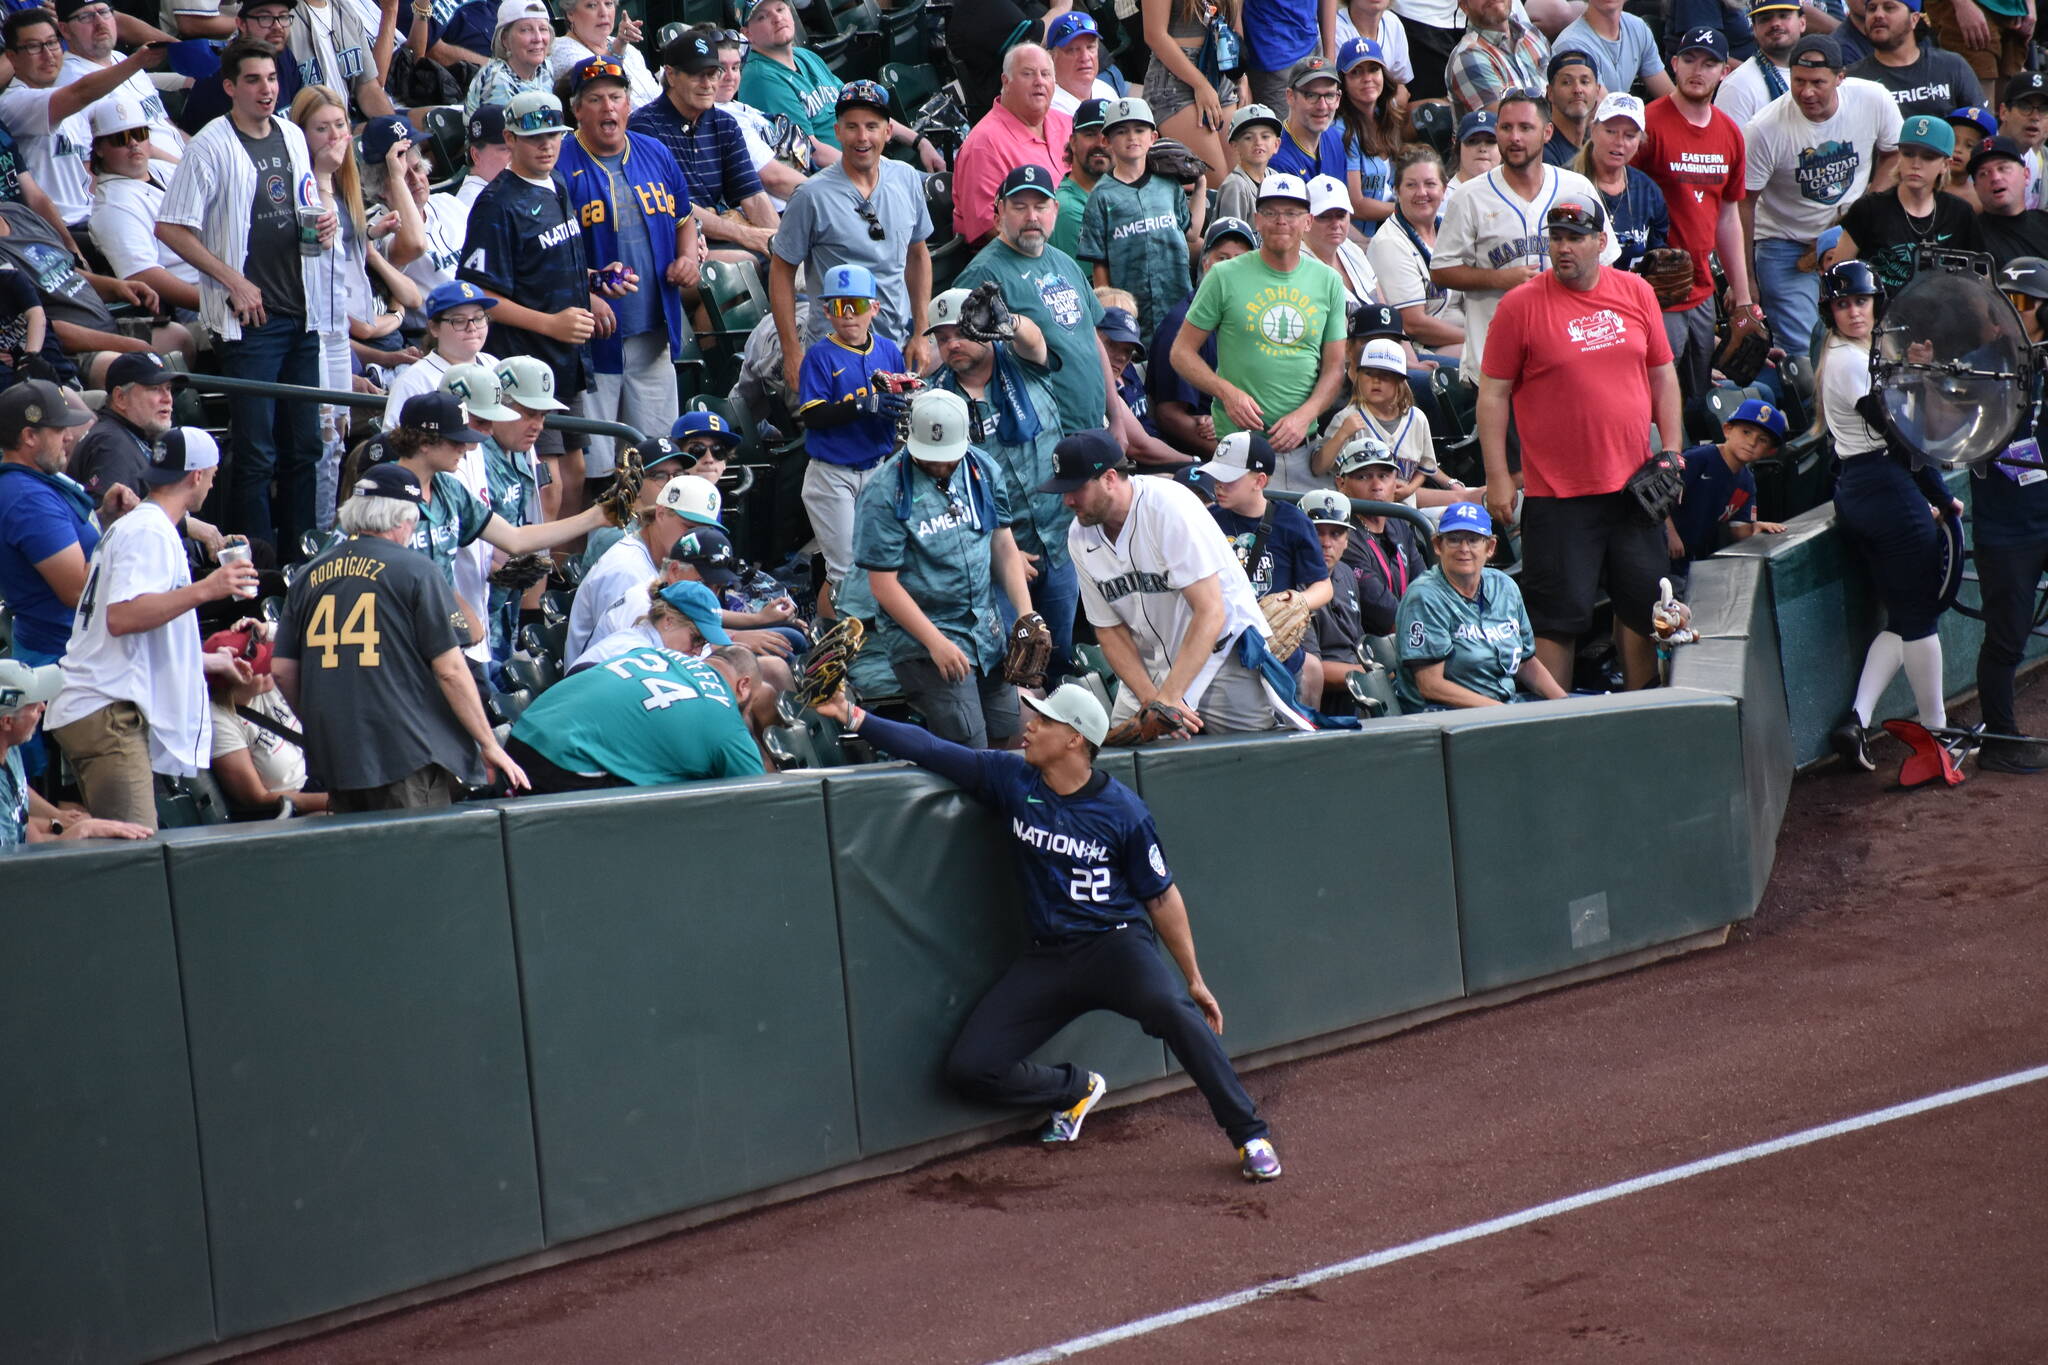 Photos: Major League Baseball All-Star Week wraps up in Seattle - Axios  Seattle